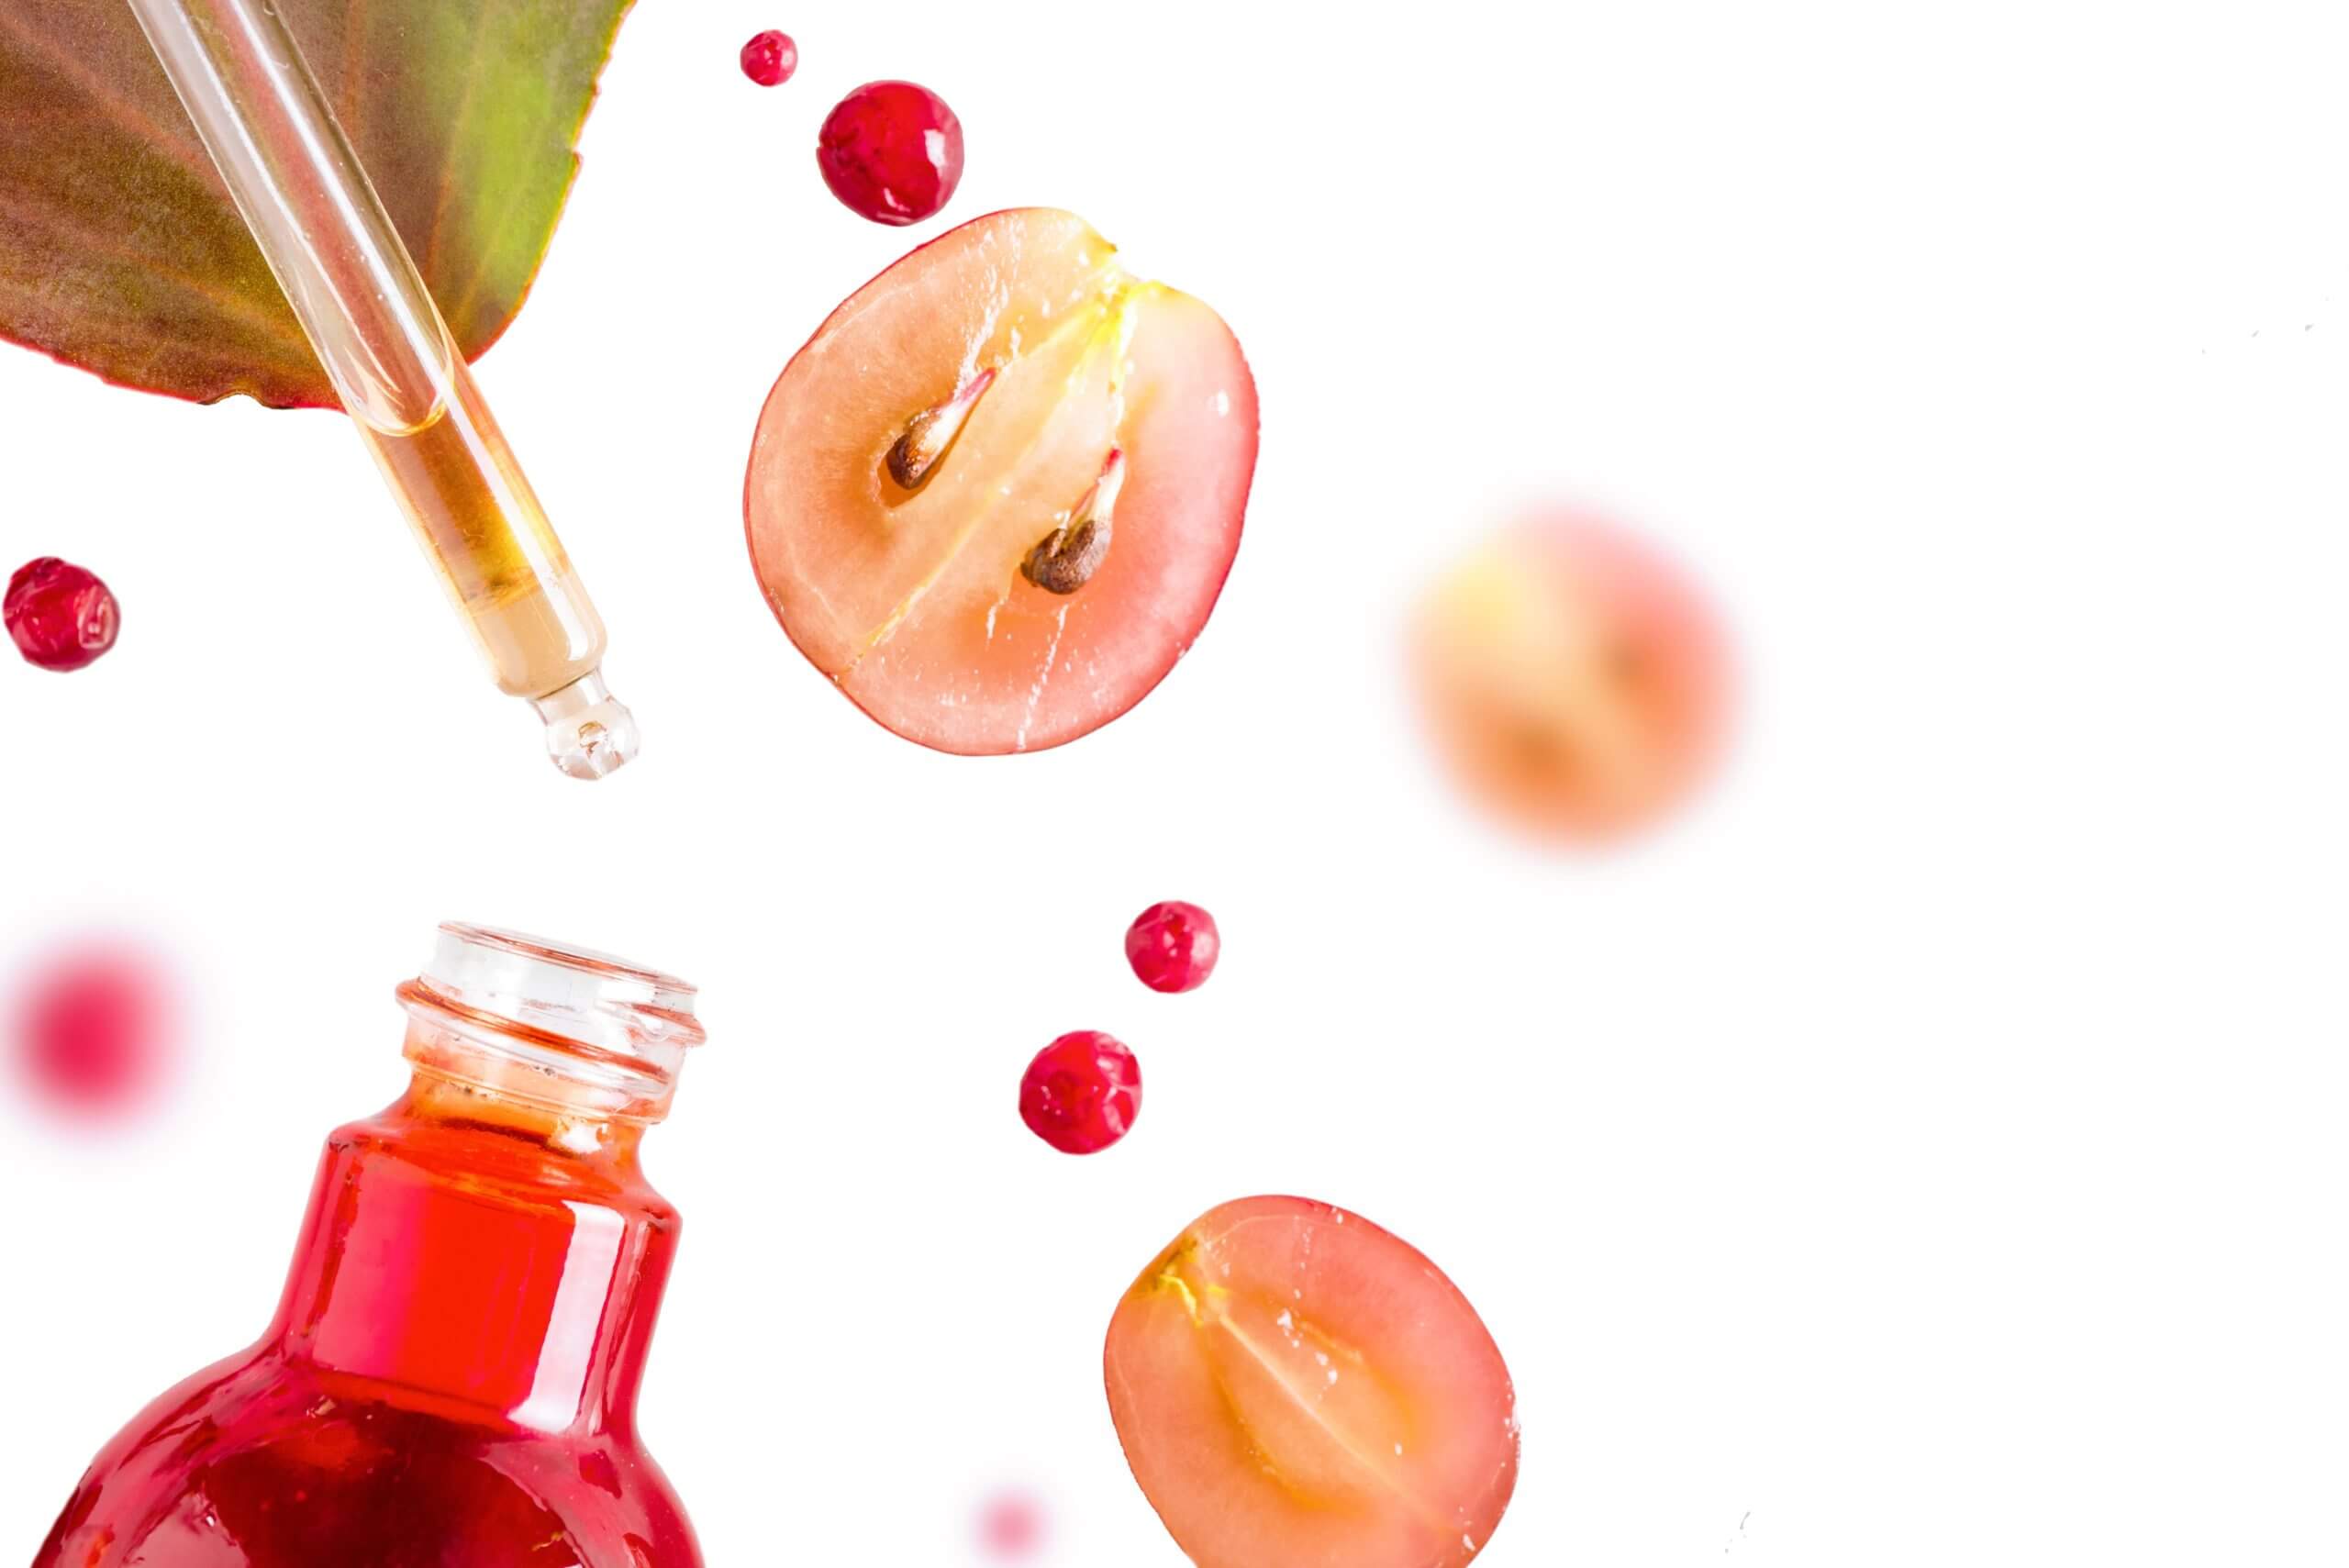 The Science Behind La Canneberge 100% Pure Cranberry Oil What Makes it So Effective